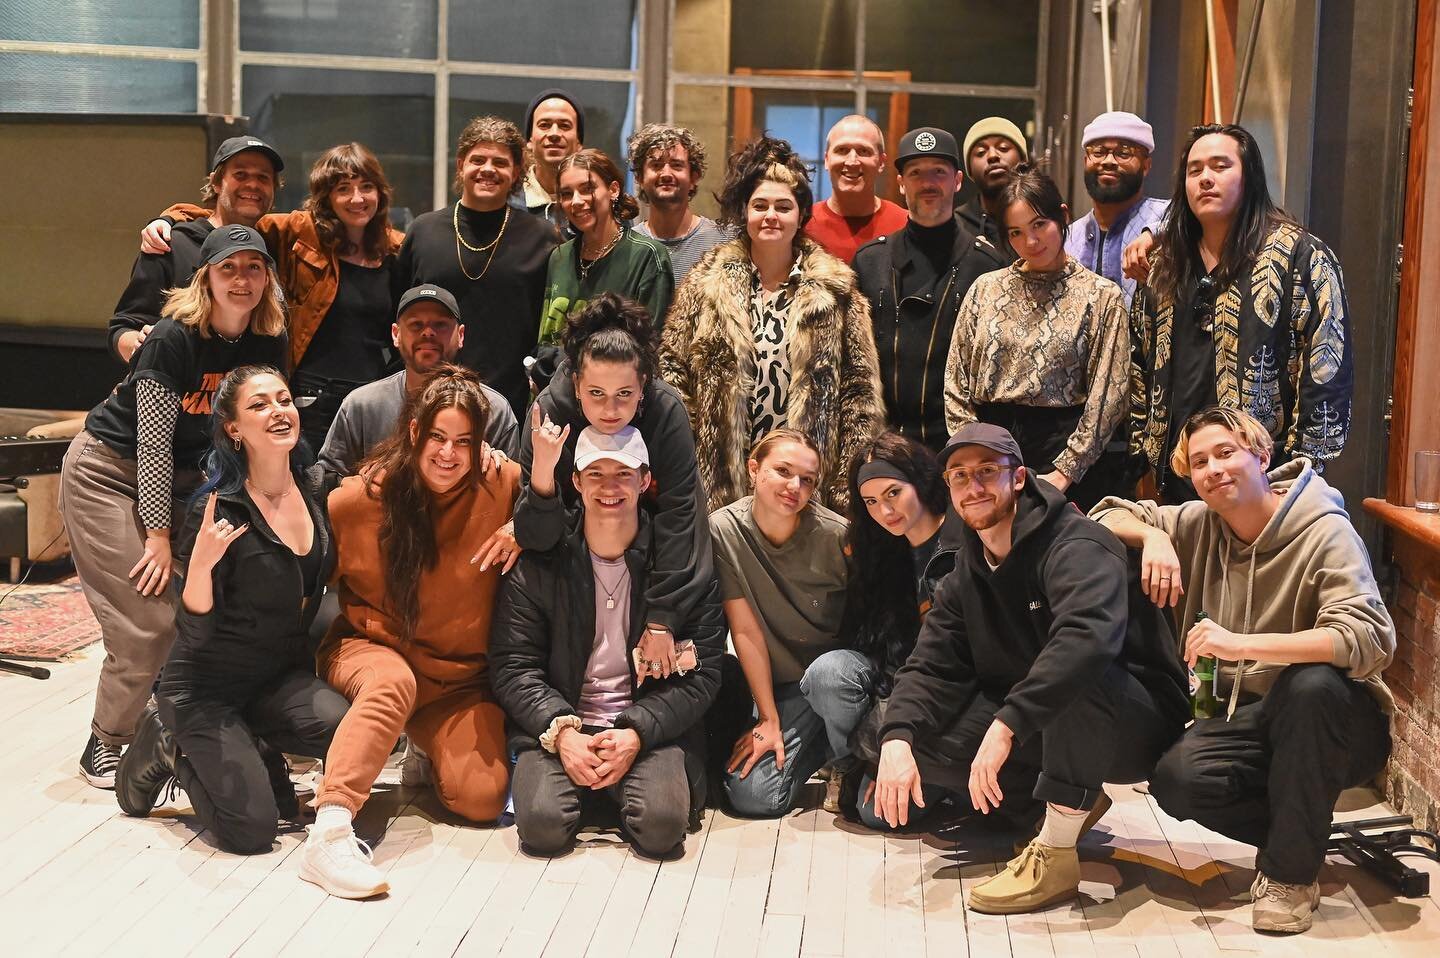 Great week in Vancouver with an incredible group artists and writers at the Warehouse Studio. Thanks to everyone for coming, couldn&rsquo;t imagine a better week.